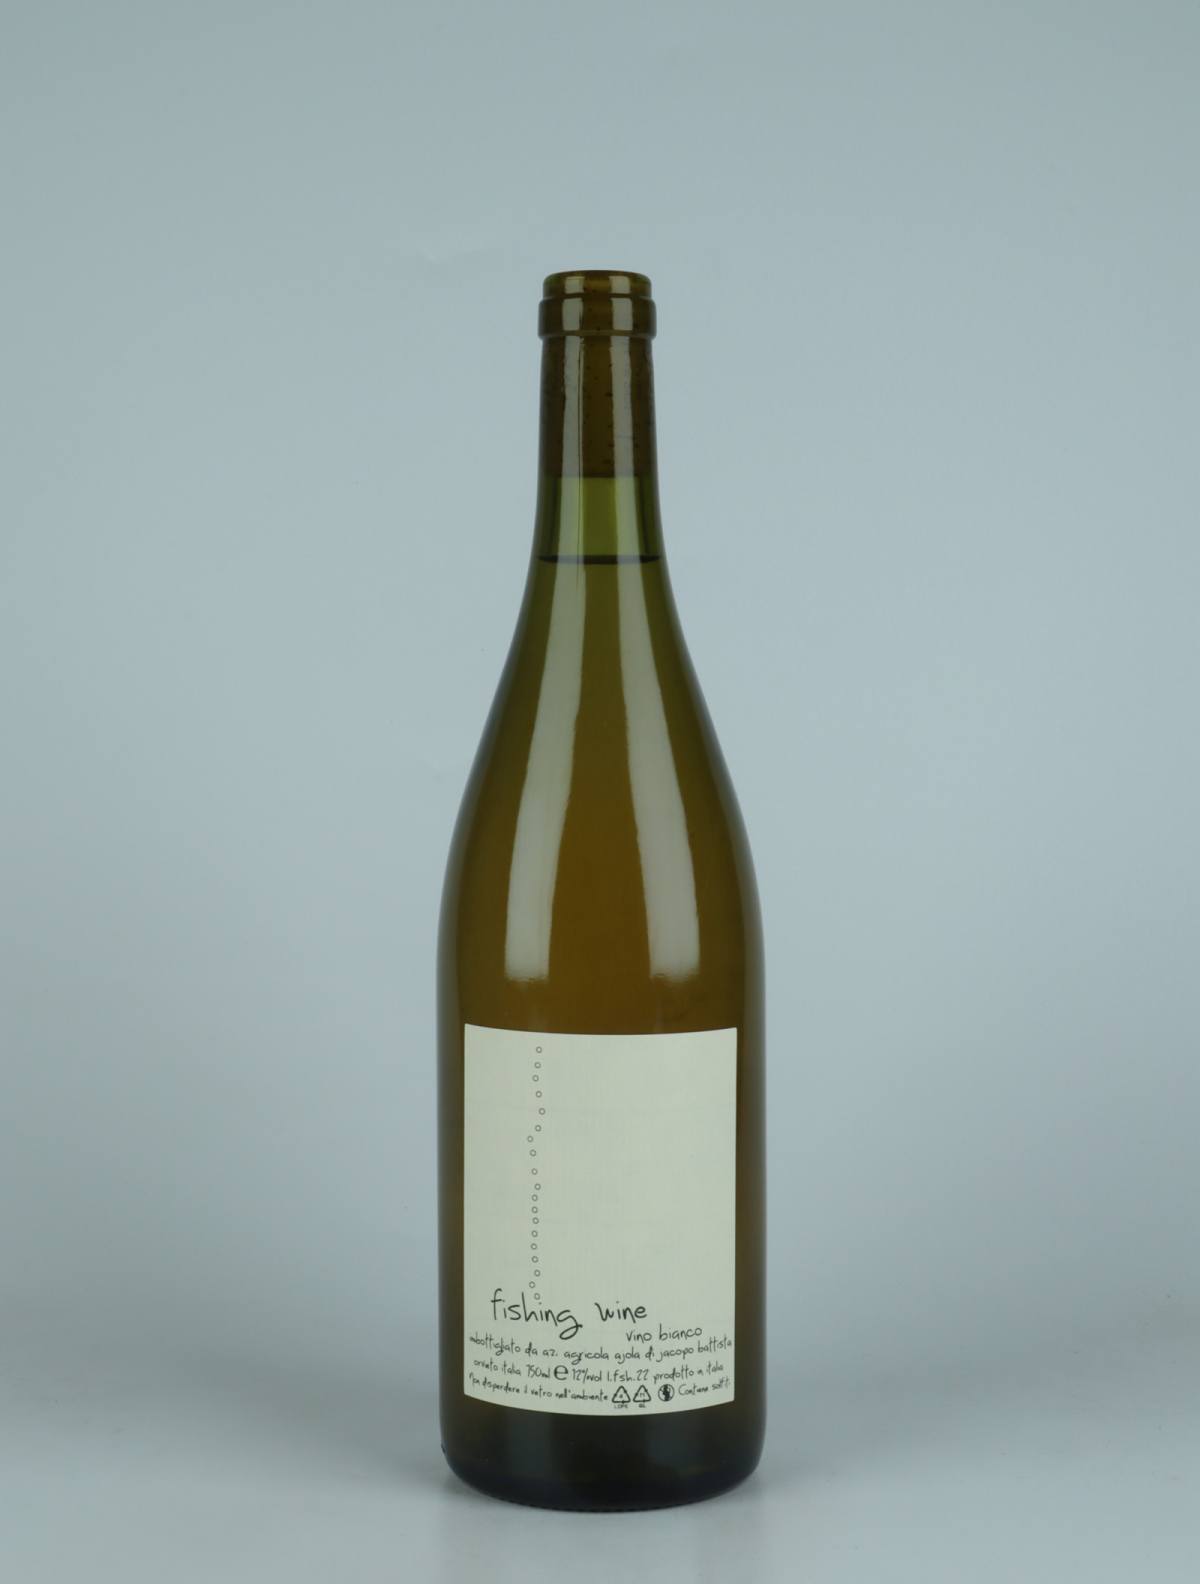 A bottle 2022 Bianco Fishing Wine White wine from Ajola, Umbria in Italy